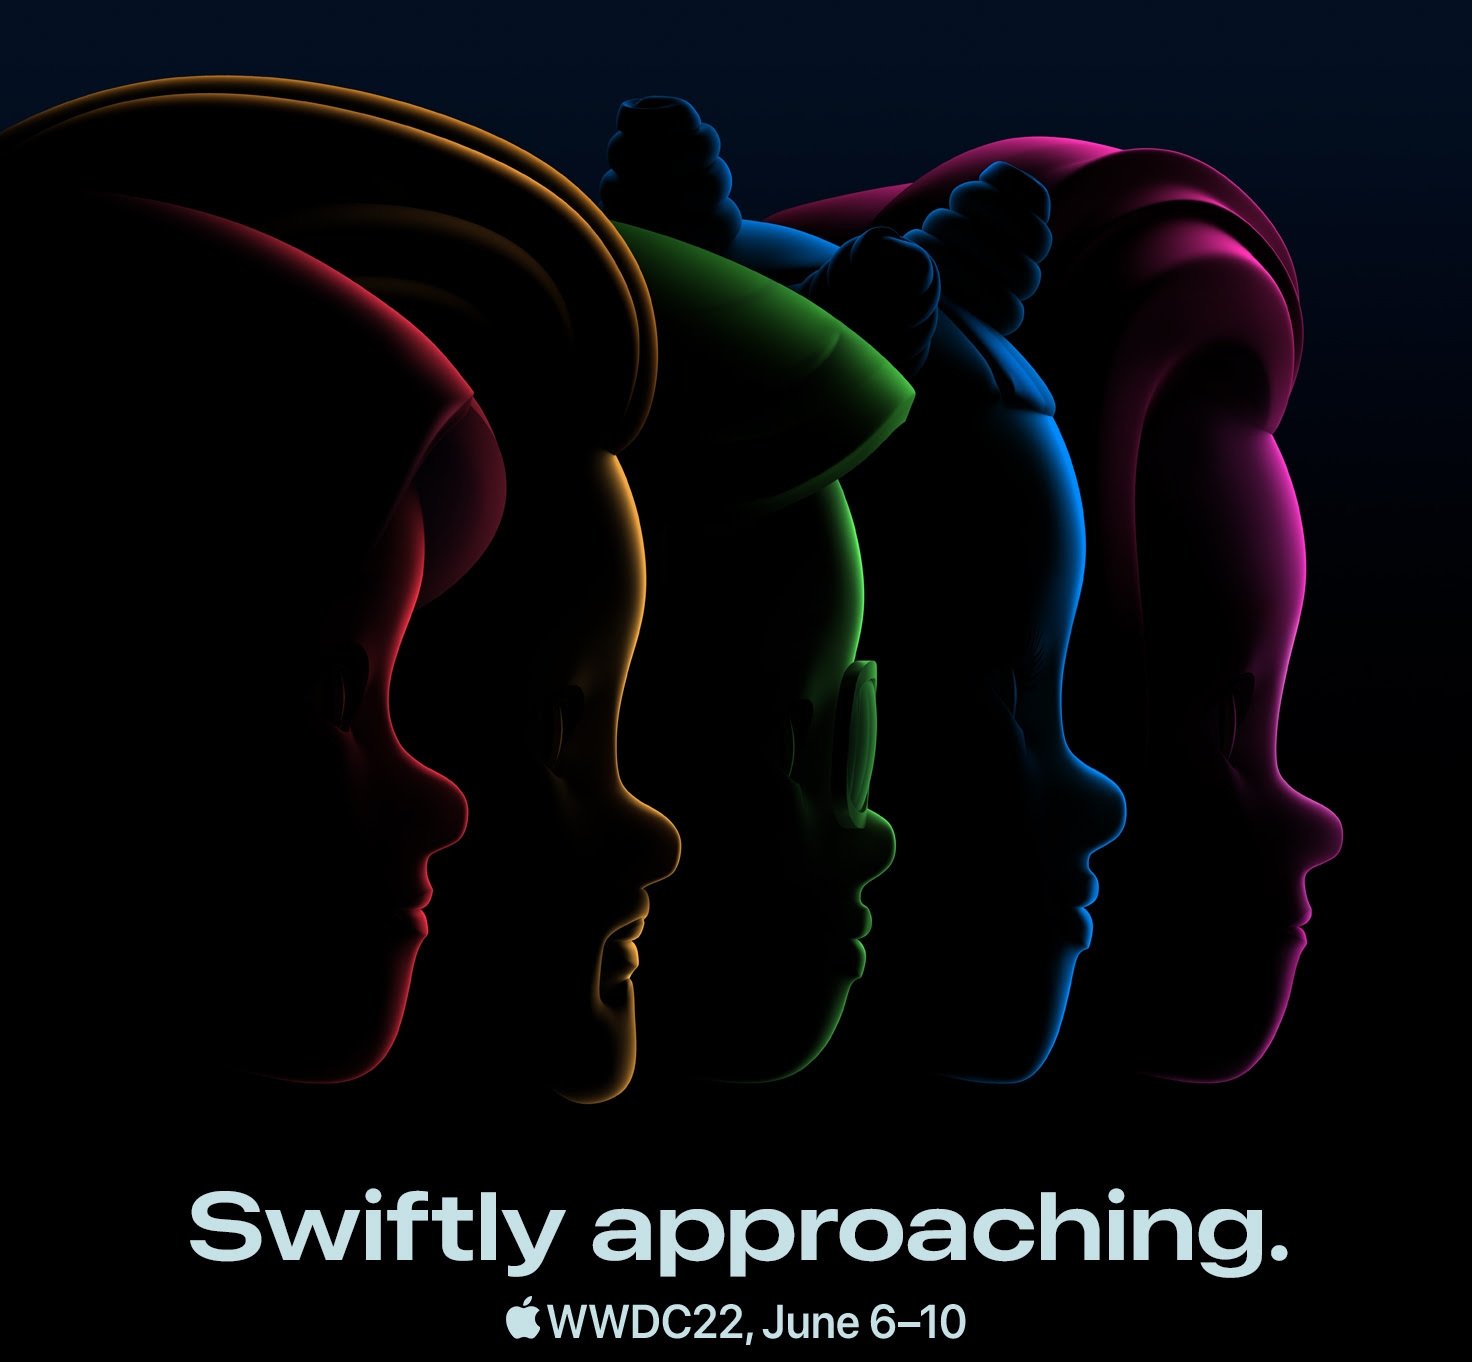 Apple WWDC 2022 invite: Memojis depicted in profile with text "Swiftly approaching" beneath them